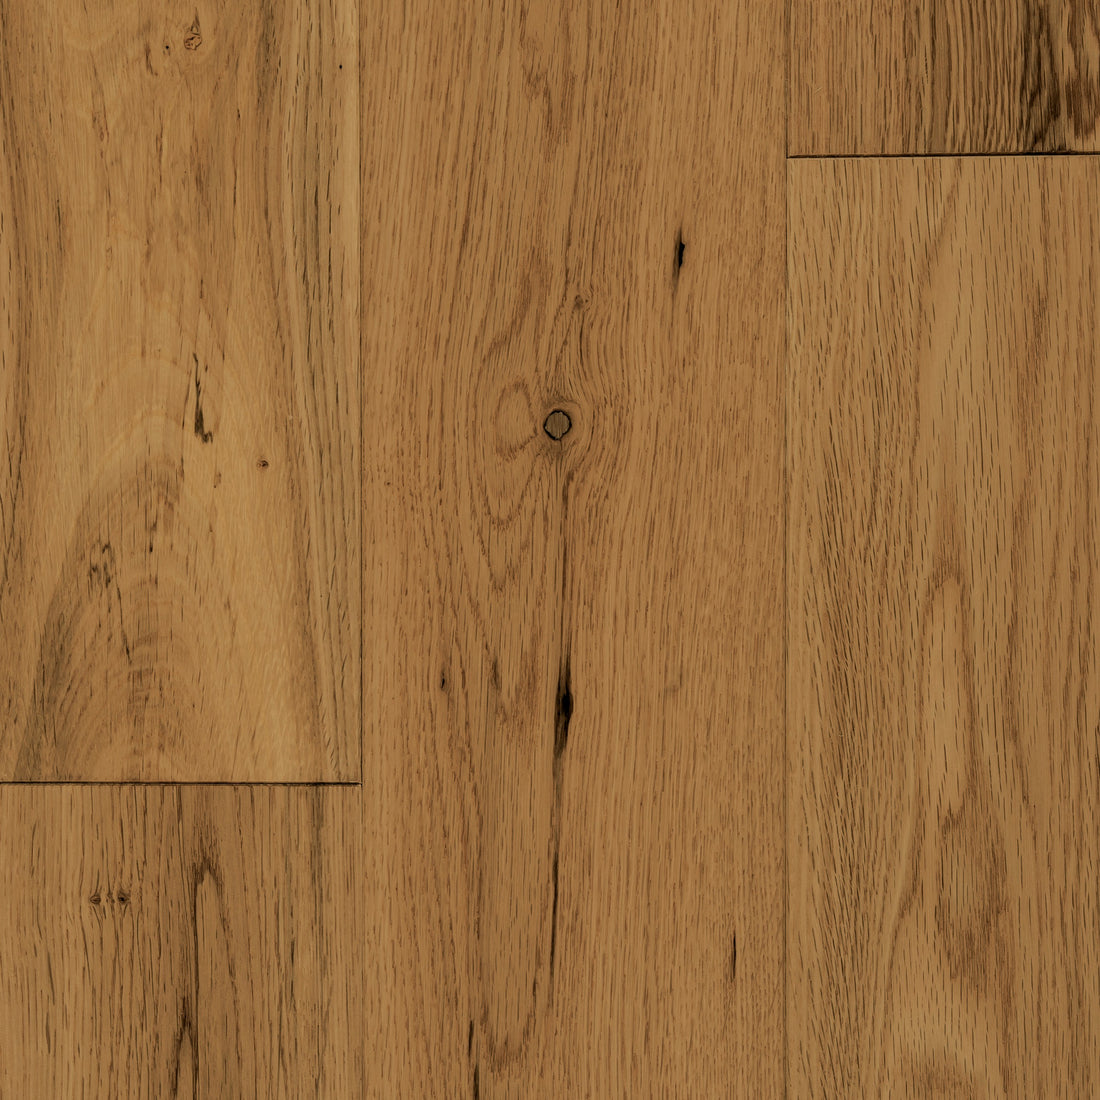 Tuscan Multiply Rustic Oak Flat Sanded Lacquered TF20